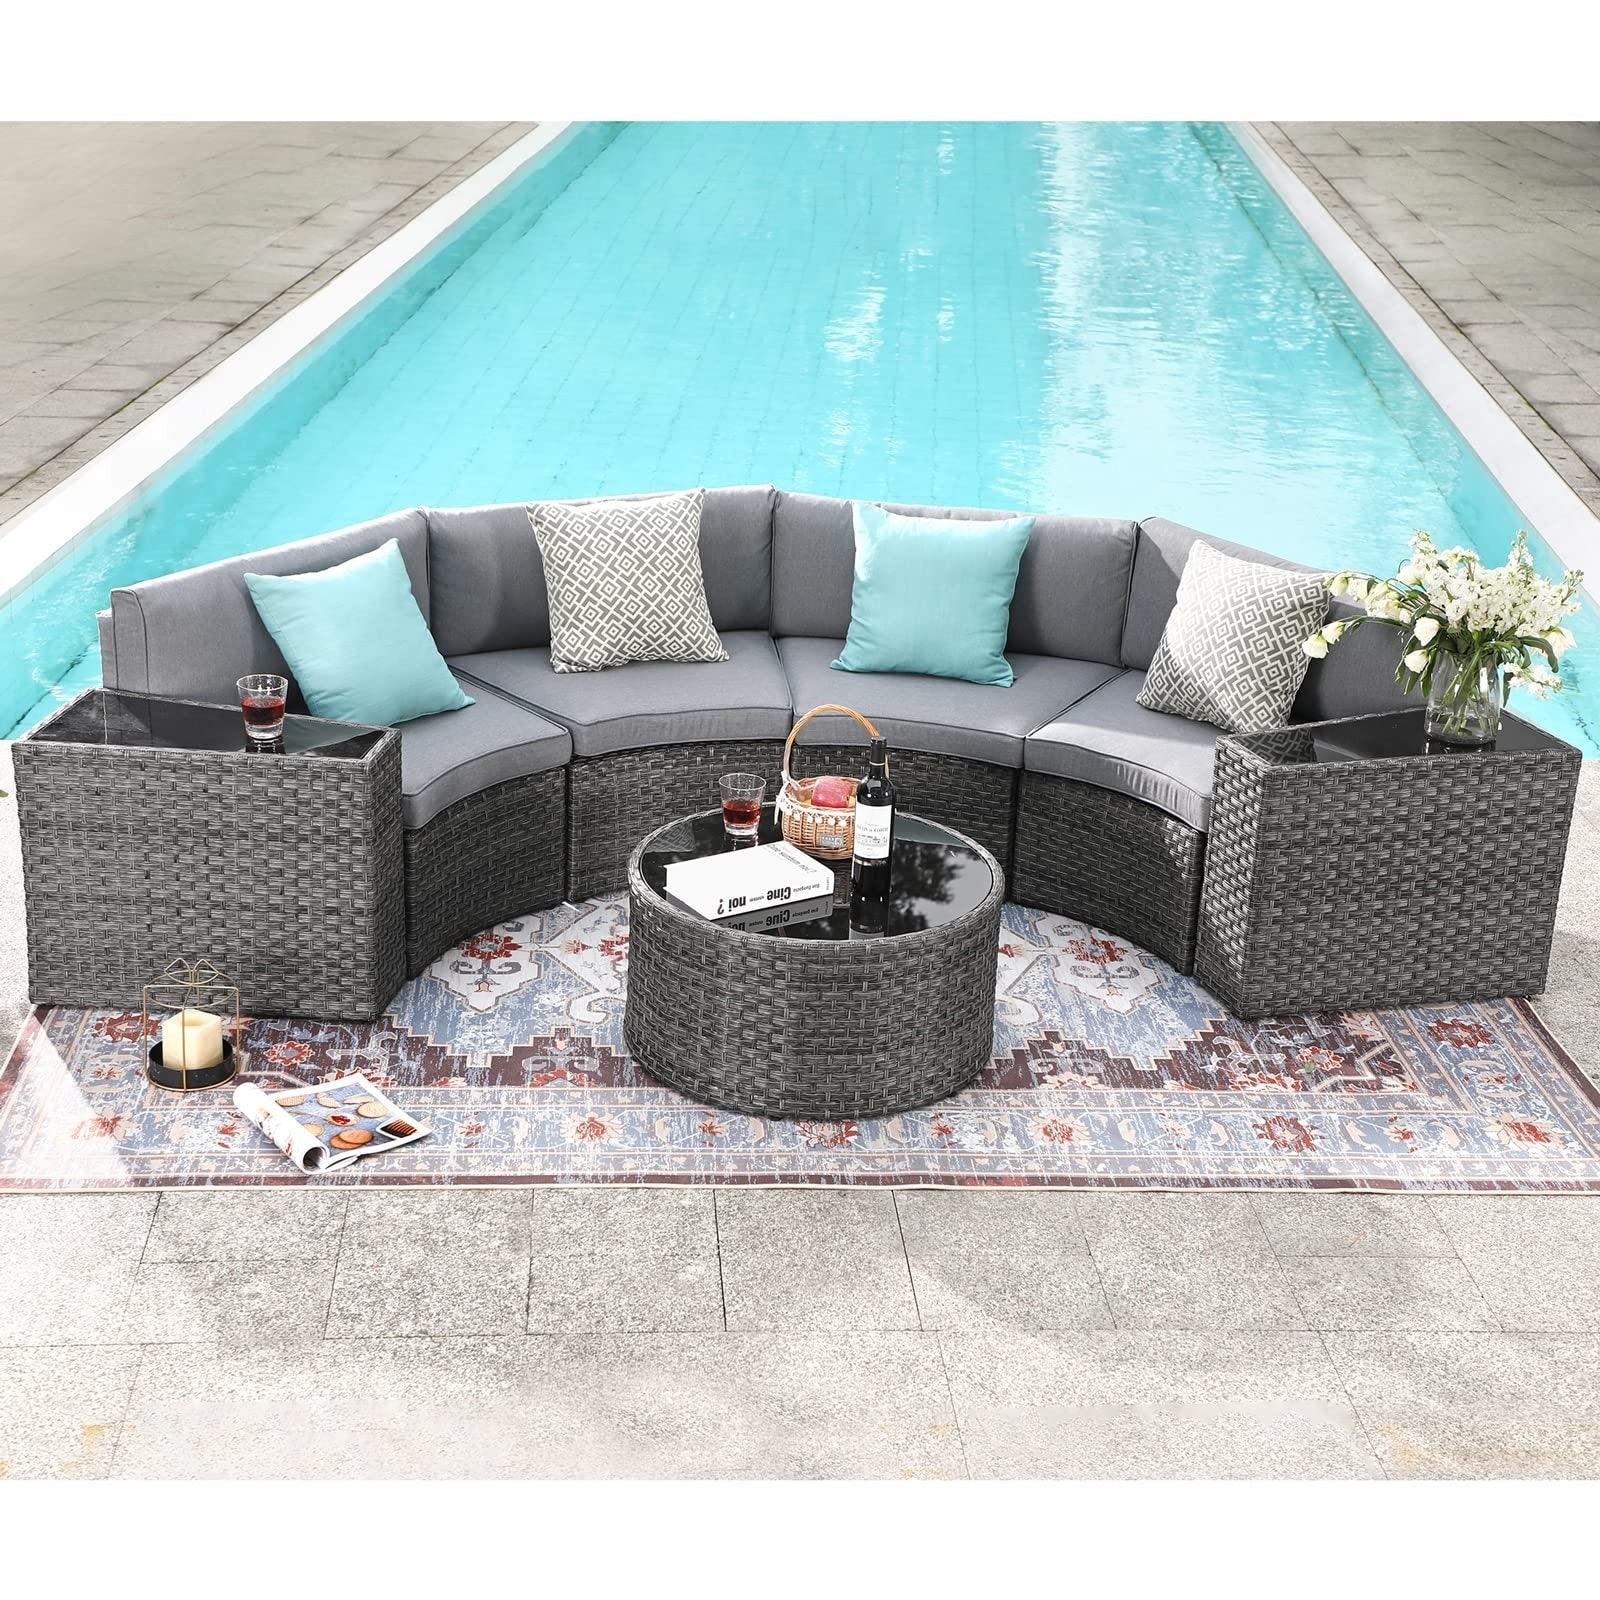 Halo IV 7-pc. Outdoor Curved Sectionals, Outdoor Half-Moon Sectional Set, Grey best price #Pieces_7-pc.